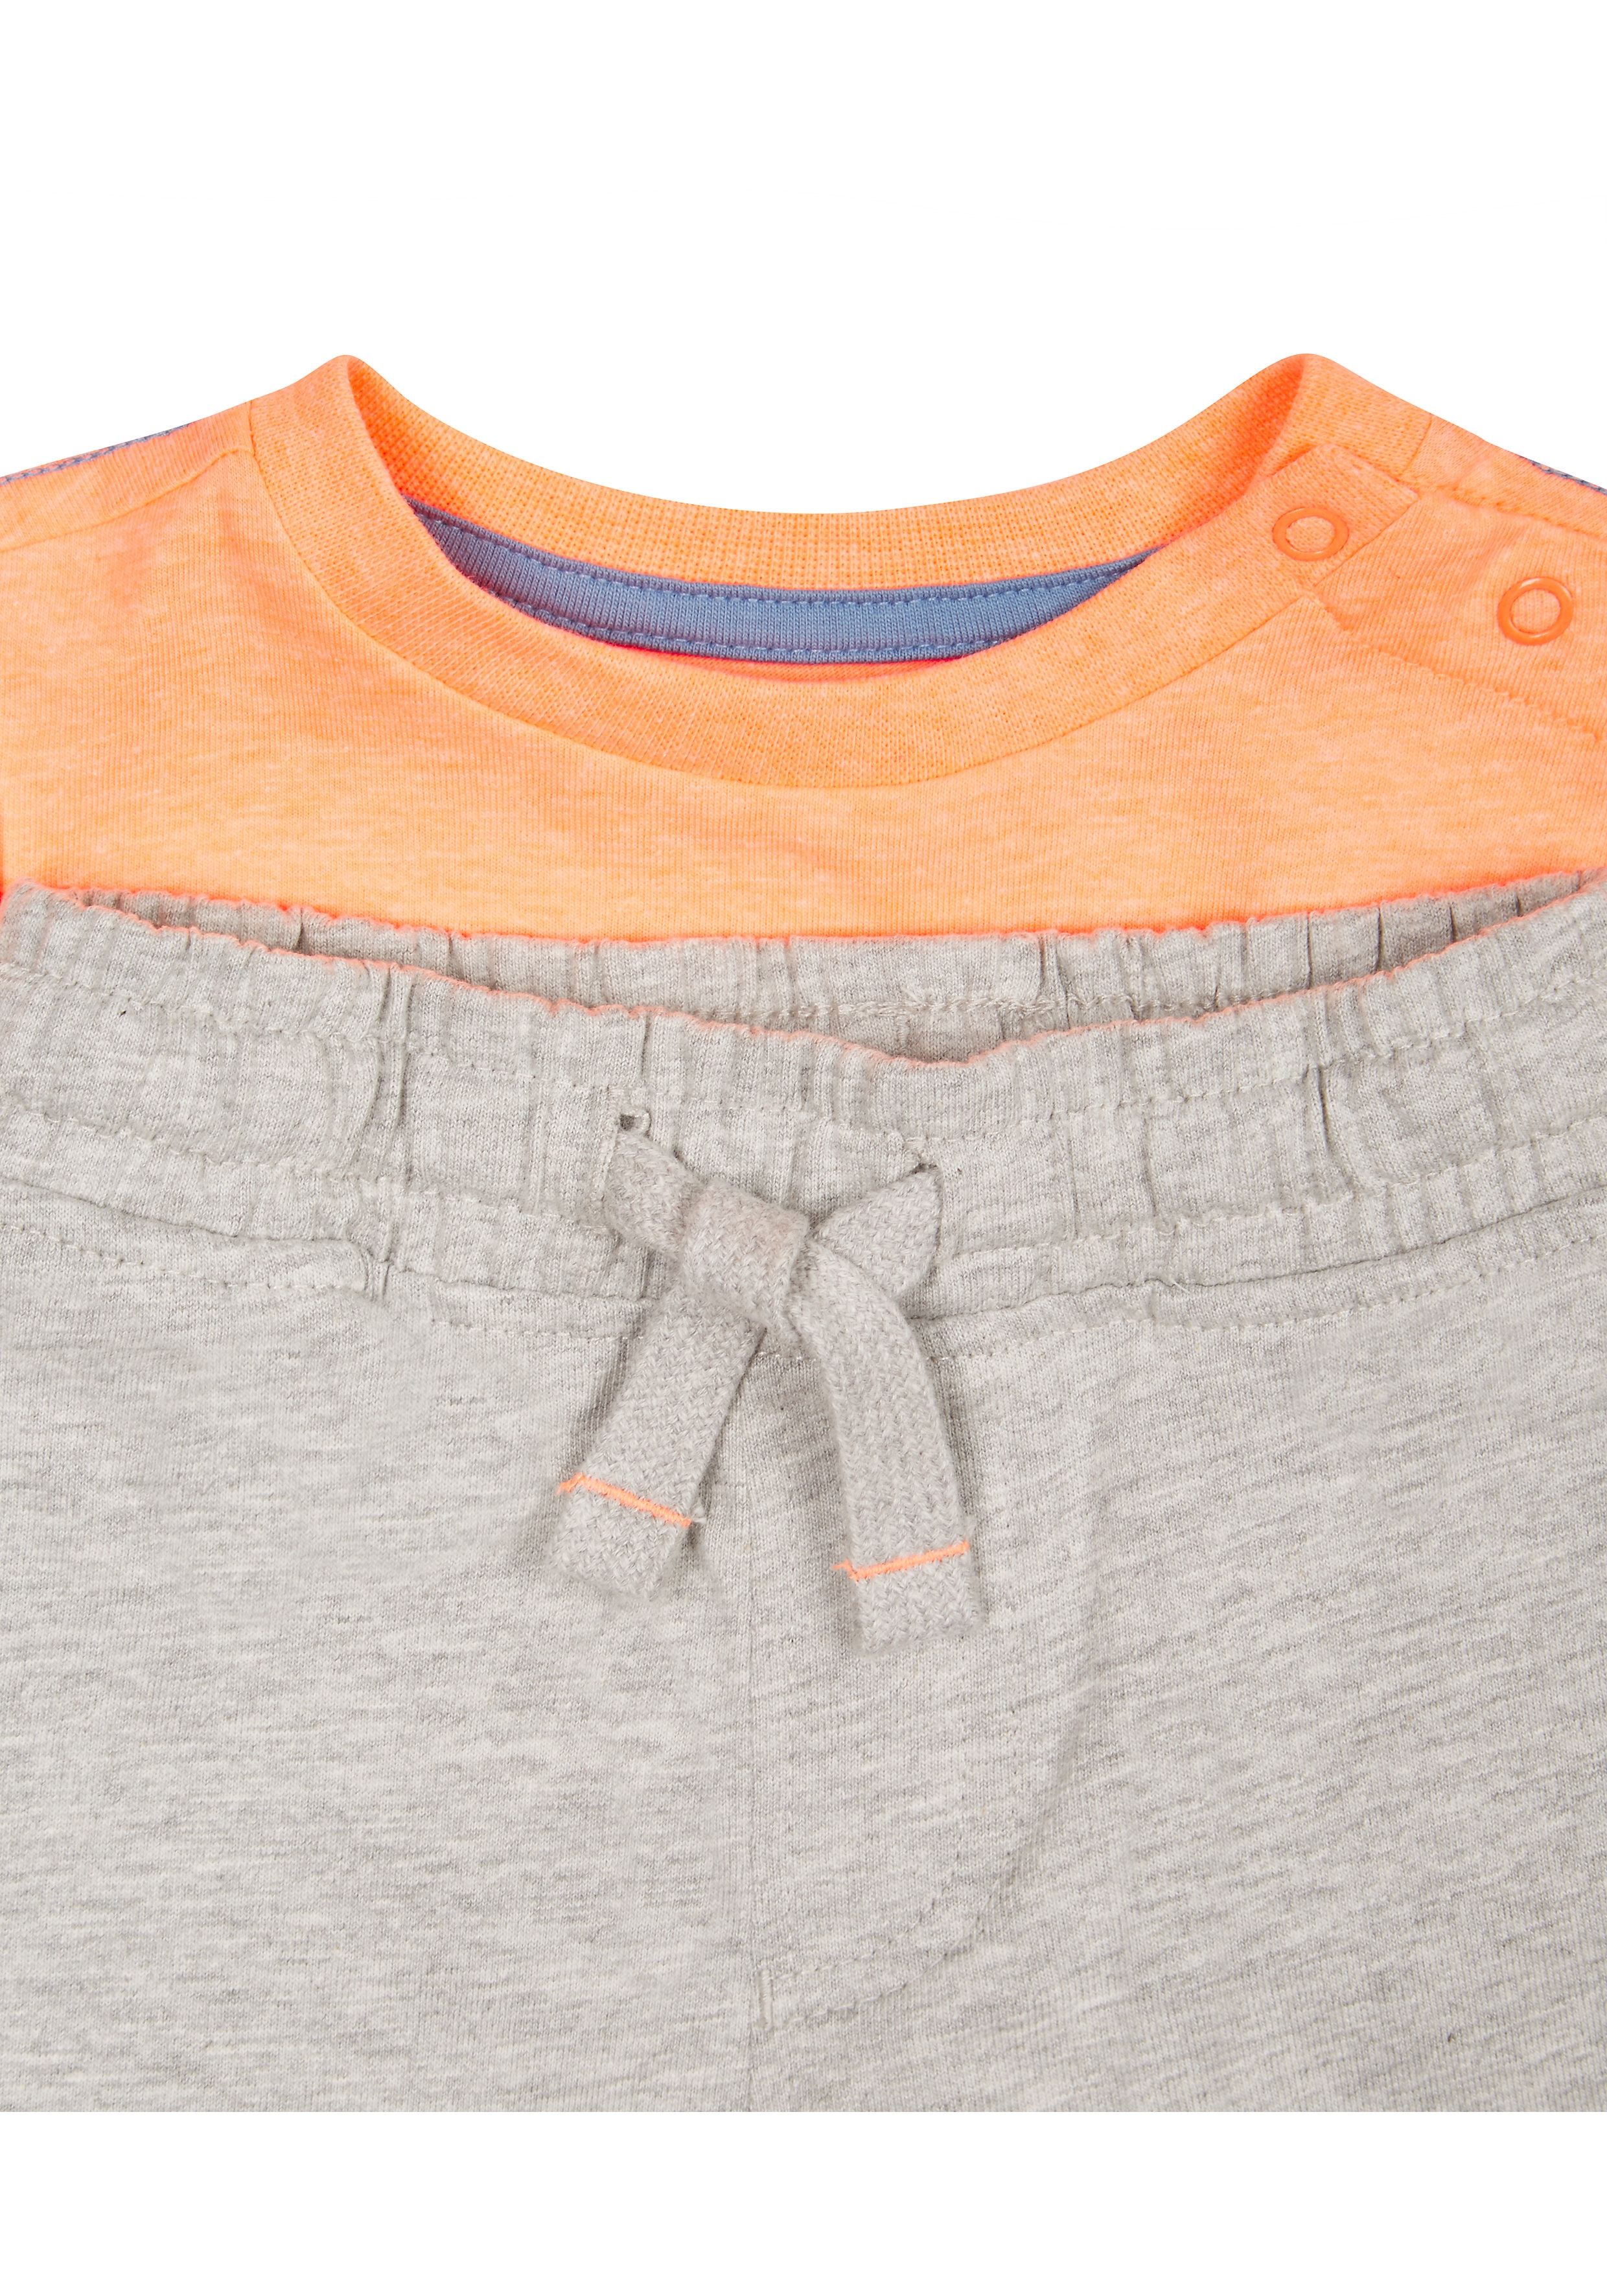 Mothercare | Boys 'Chill Out' Tee And Shorts Set - Orange 2